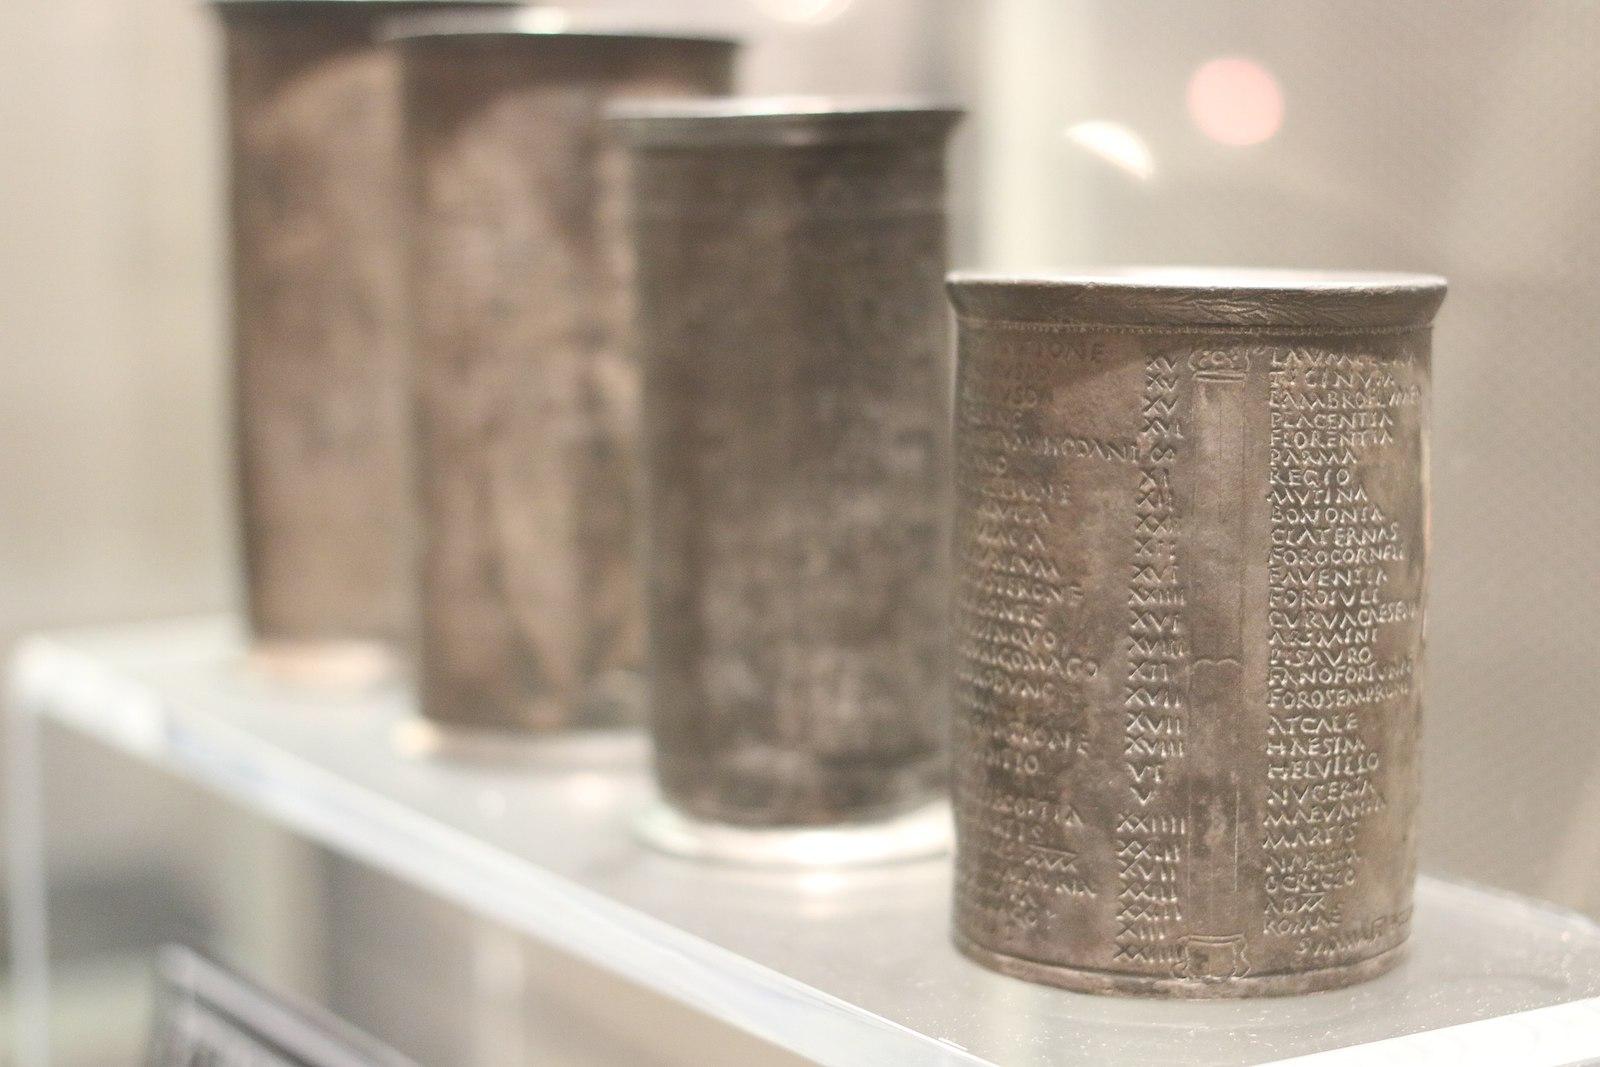 Four silver beakers found at Vicarello, Italy. Each cup has inscribed upon it a travel itinerary that one could follow in the Roman period with many stops including thermal spas and other important water features and sites.